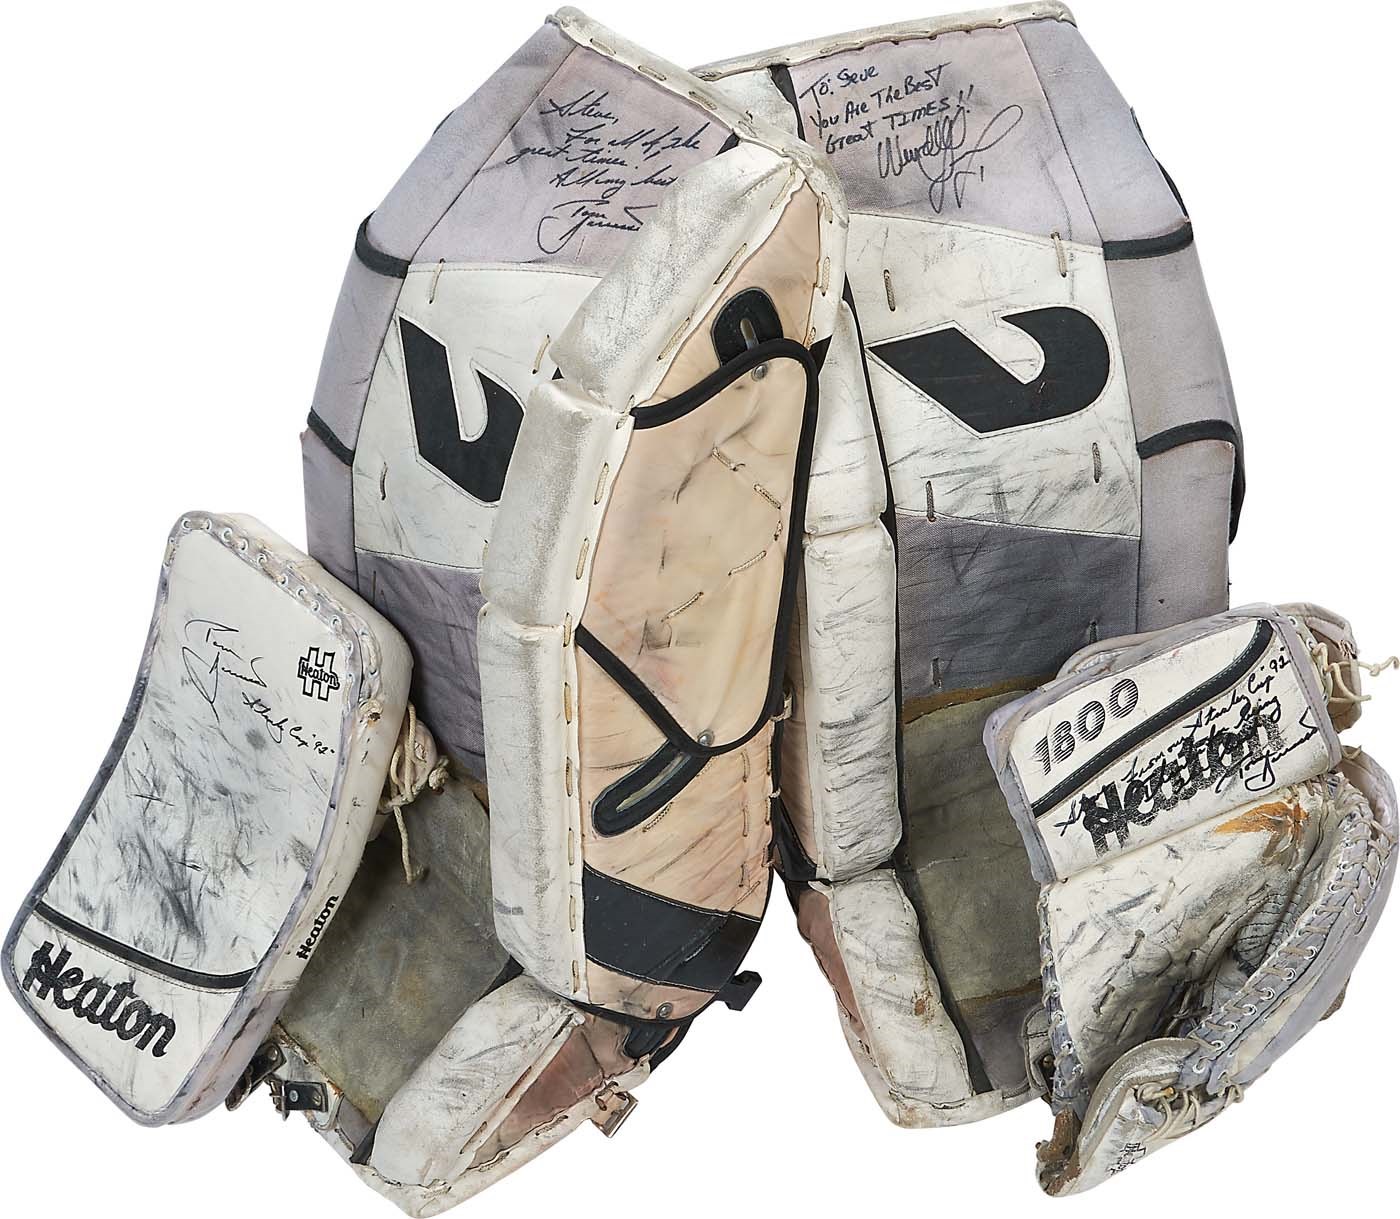 Hockey - 1992 Tom Barrasso Stanley Cup Finals Game Worn Catcher, Blocker and Leg Pads (Photo-Matched)